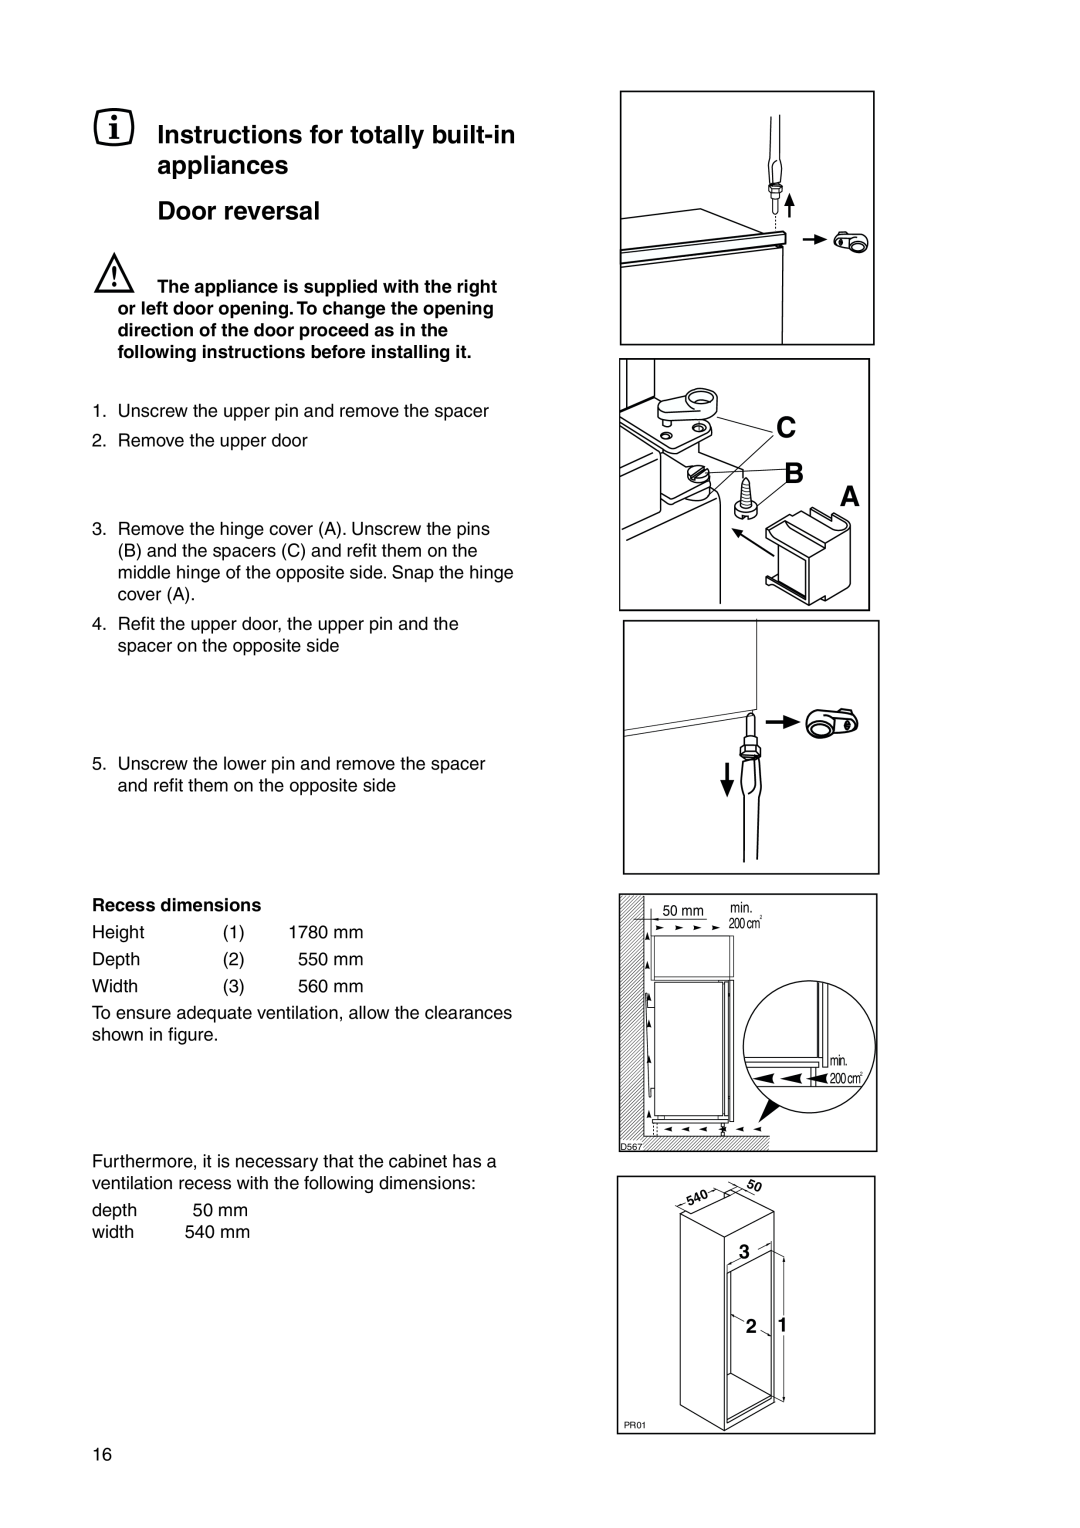 Electrolux 2223 208-81 user manual Instructions for totally built-in appliances Door reversal, Recess dimensions 